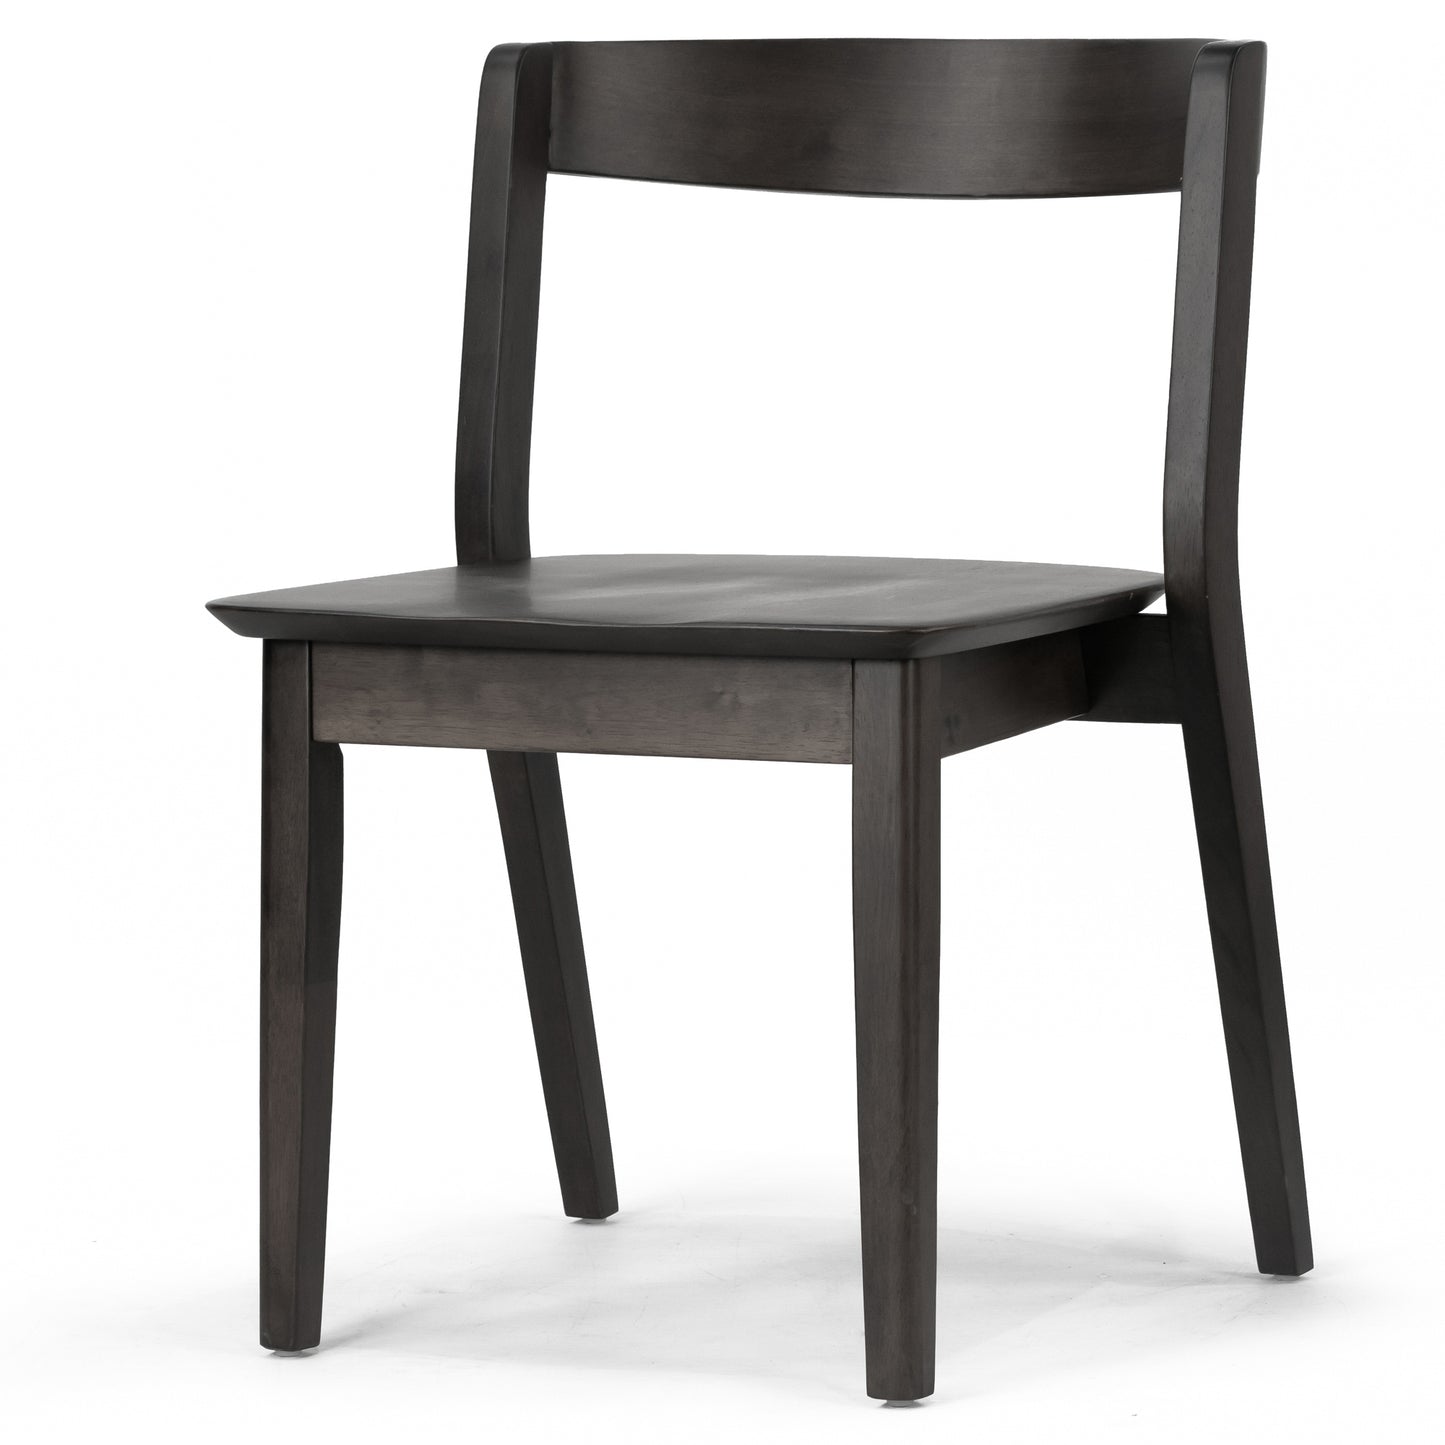 Set of 2 Astor Black Solid Wood Chair with Curved Back